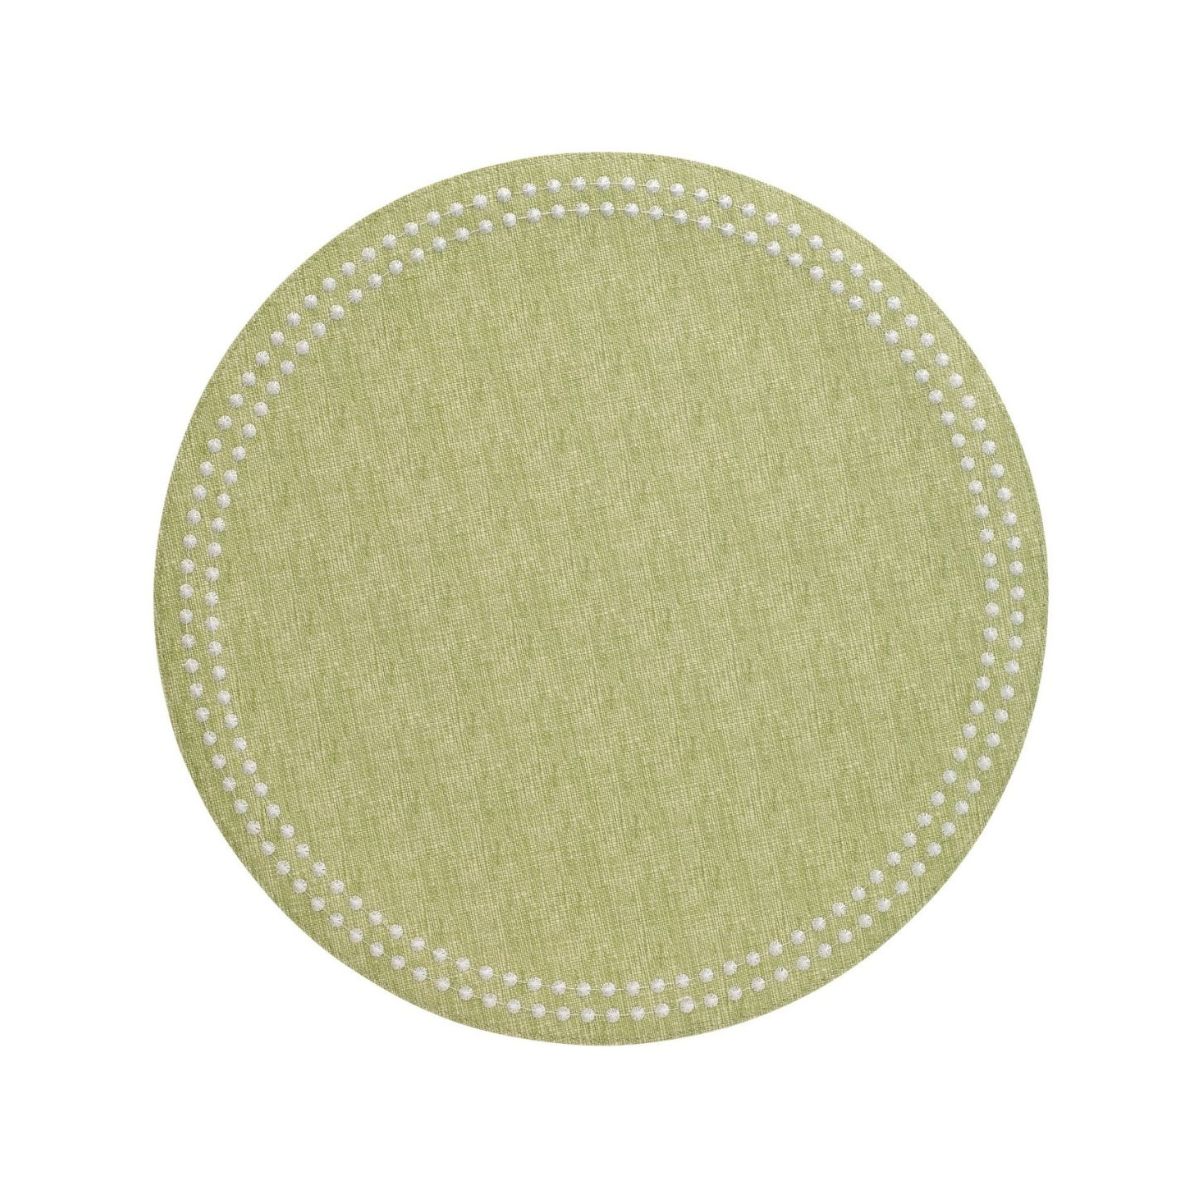 Bodrum Easy Care Pearls Embroidered Placemats, Set of 4